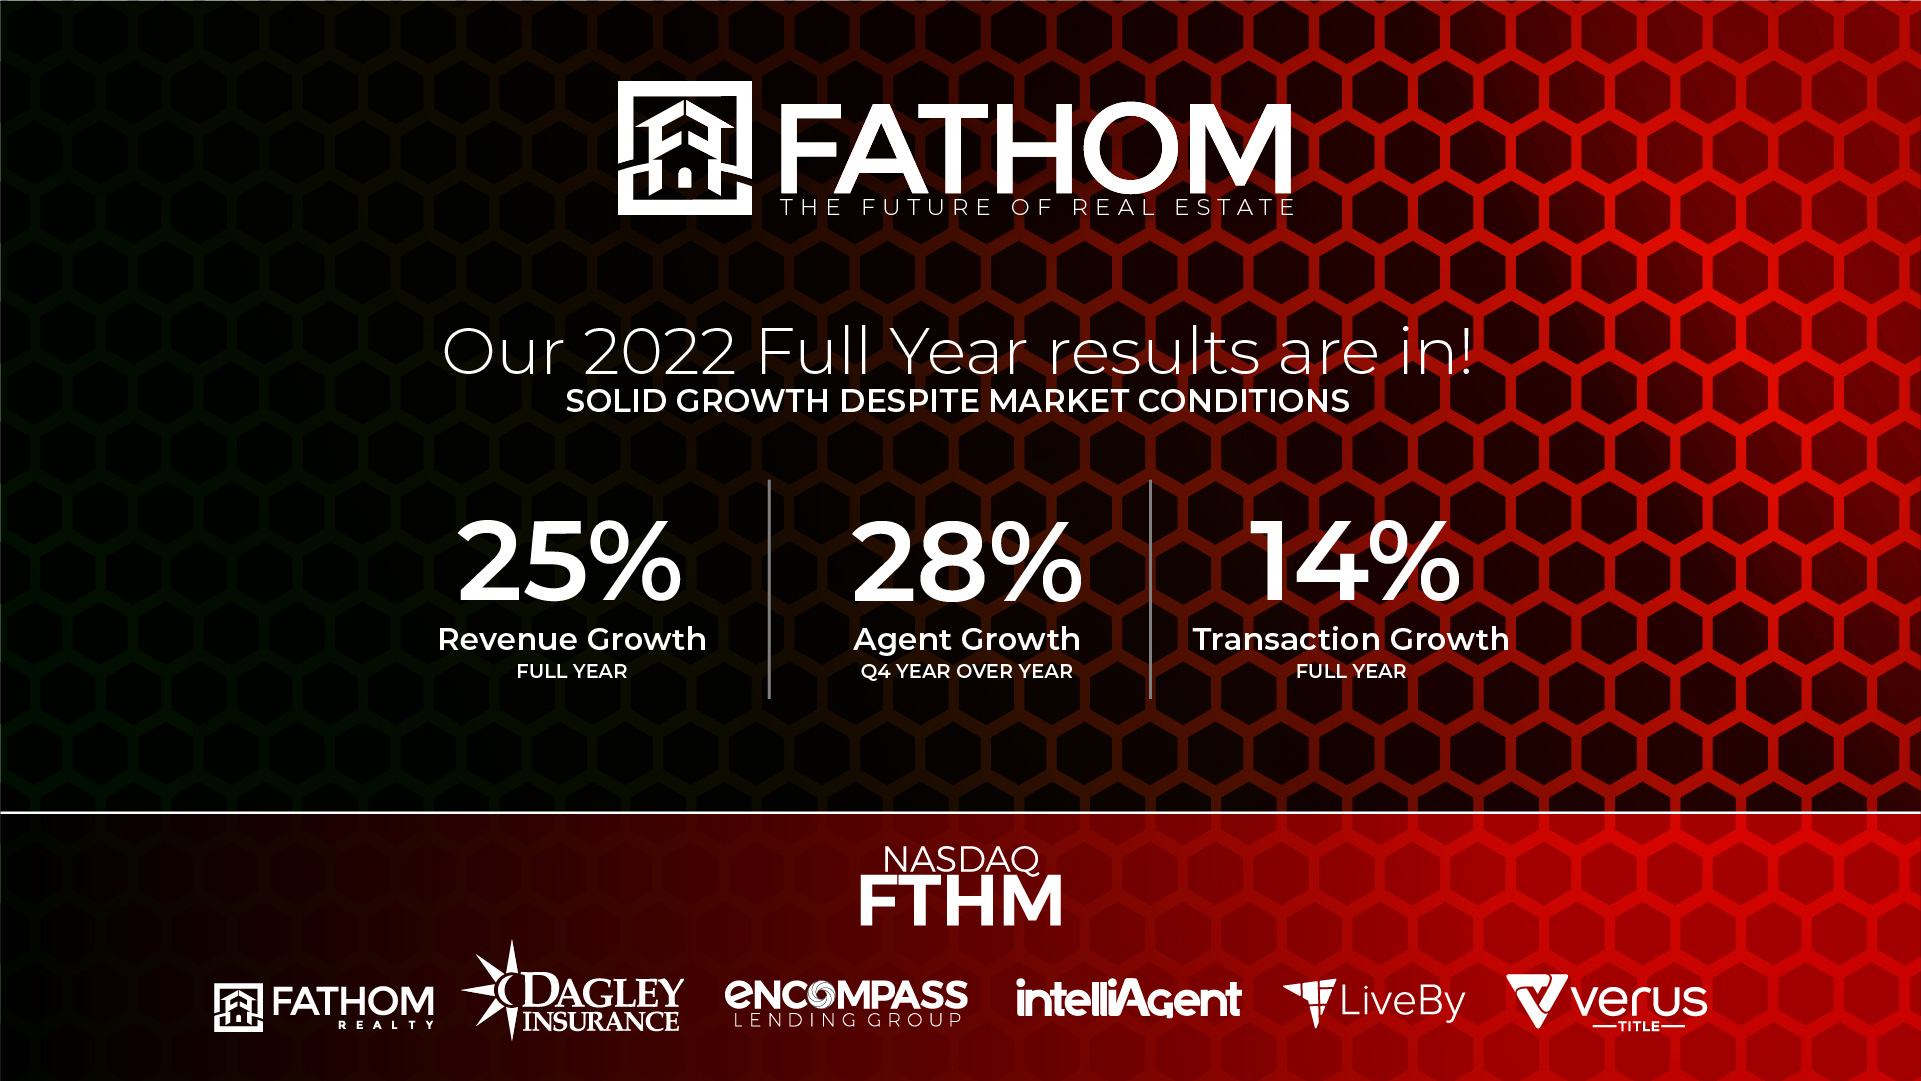 Featured image for “Fathom Holdings, Inc. Achieves Strong Year-over-Year Growth for 4Q 2022”